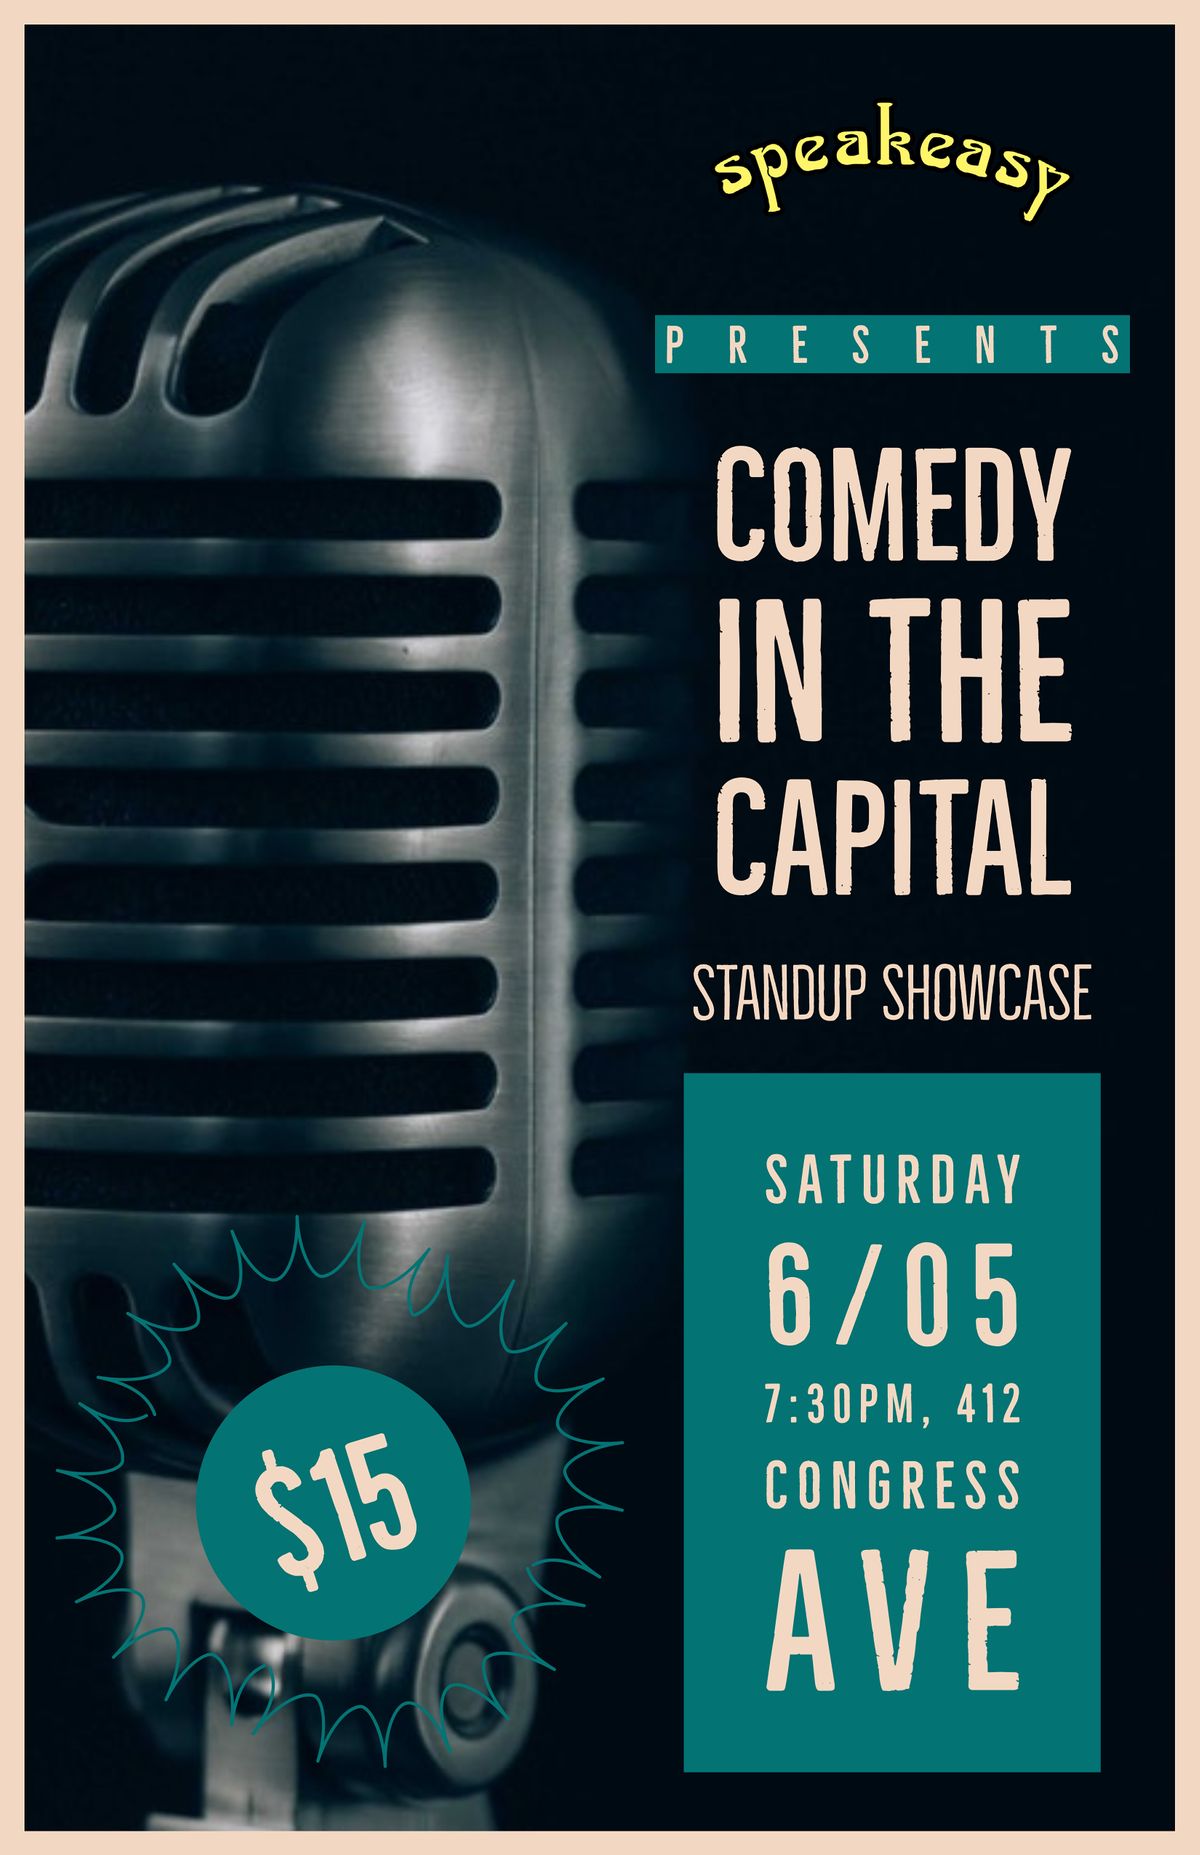 Comedy in the Capital Live at Speakeasy